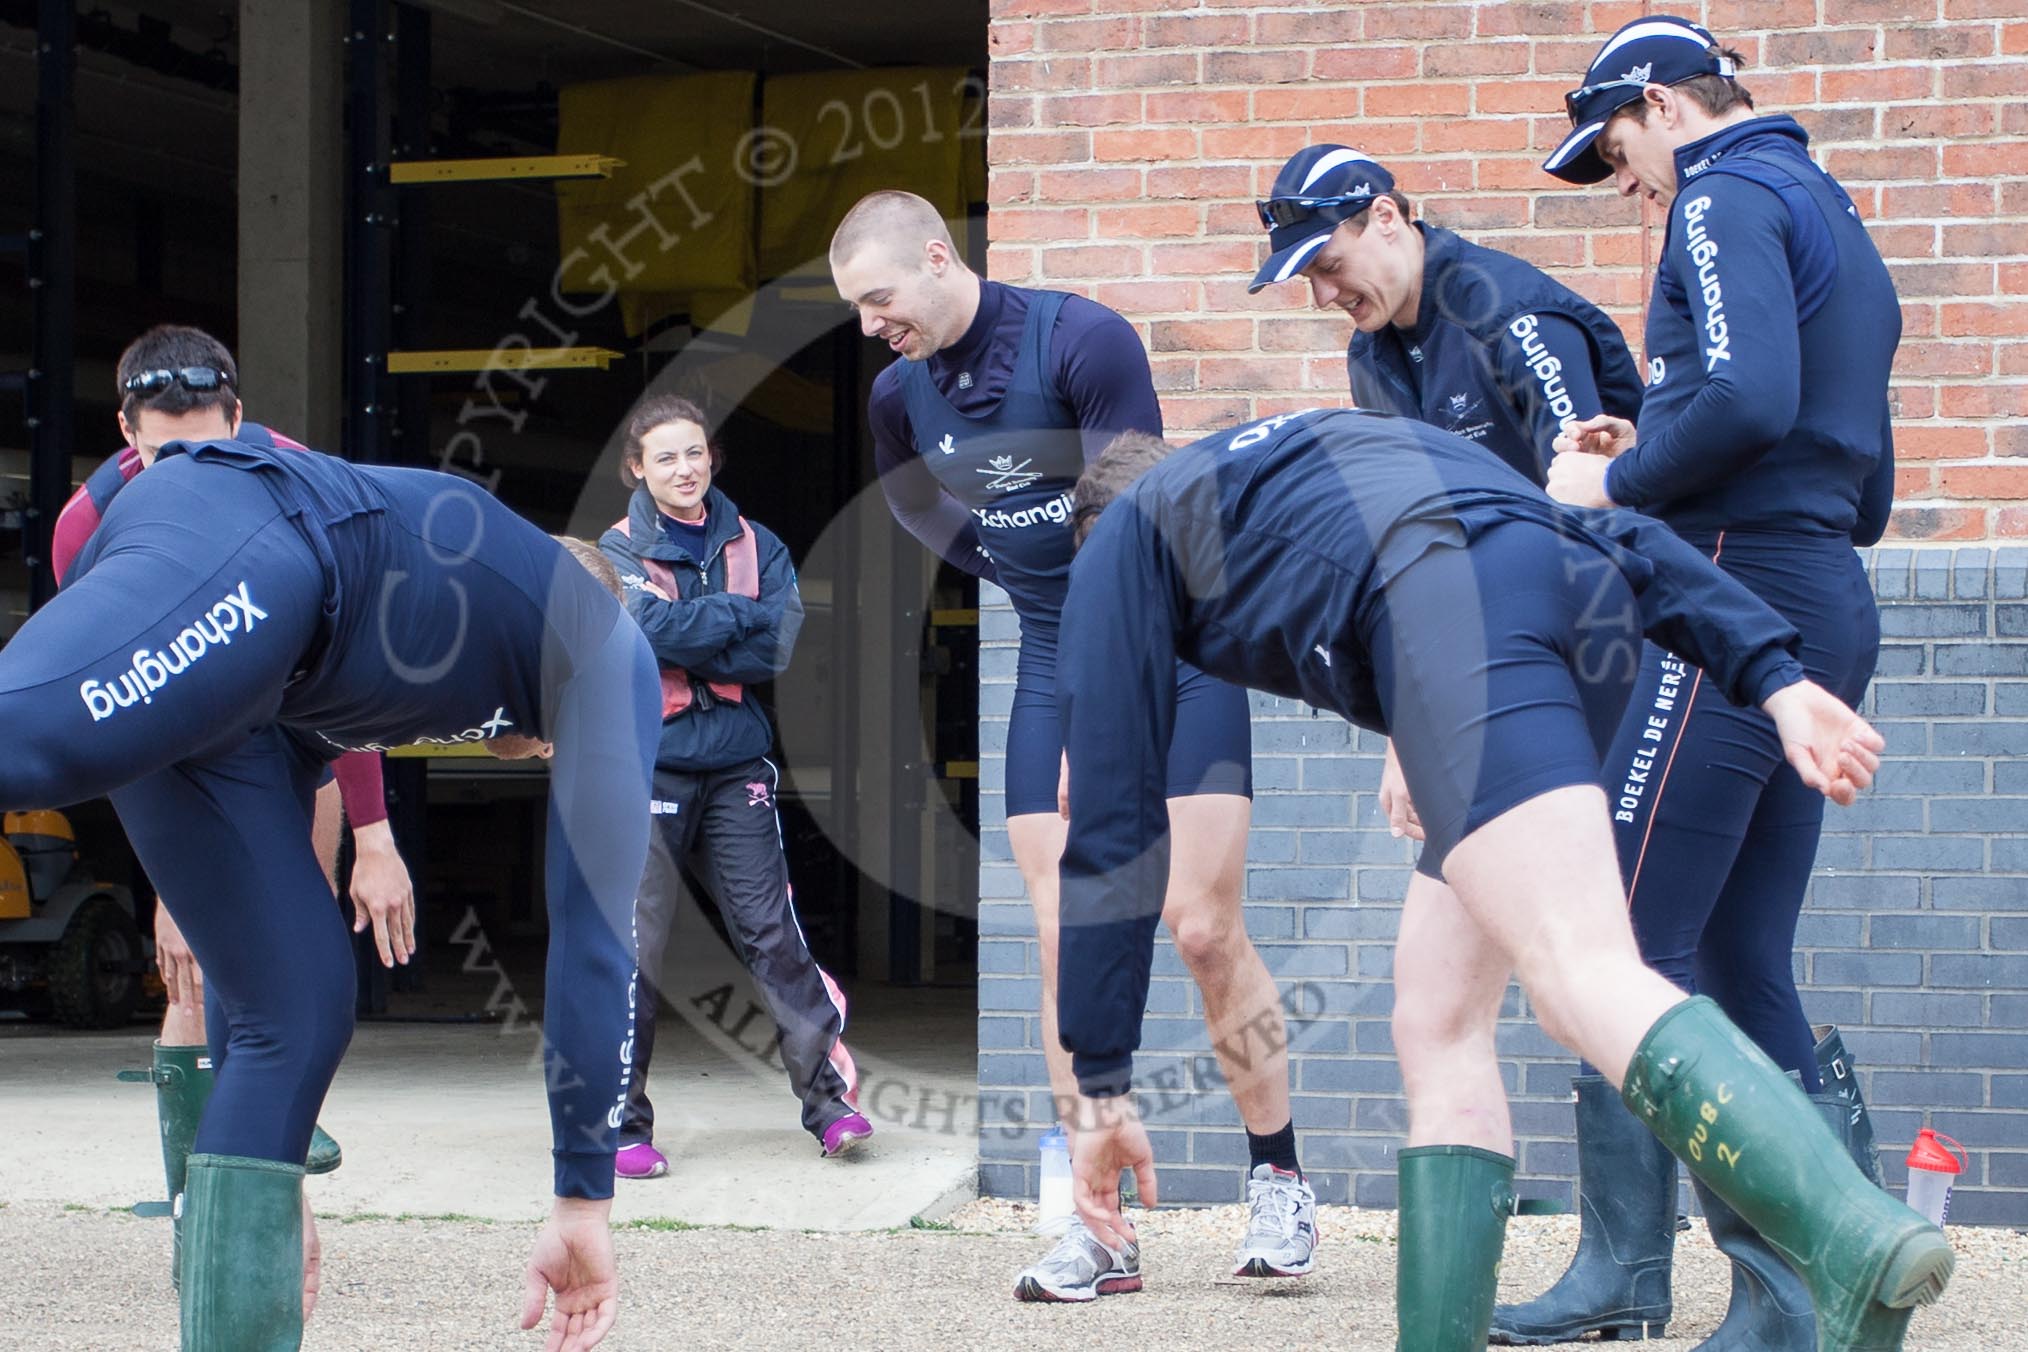 The Boat Race season 2012 - OUBC training: Next to the boathouse, from left to right William Zeng, Zoe de Toledo, Alex Davidson, Karl Hudspith, and Roel Haen..


Oxfordshire,
United Kingdom,
on 20 March 2012 at 14:54, image #7